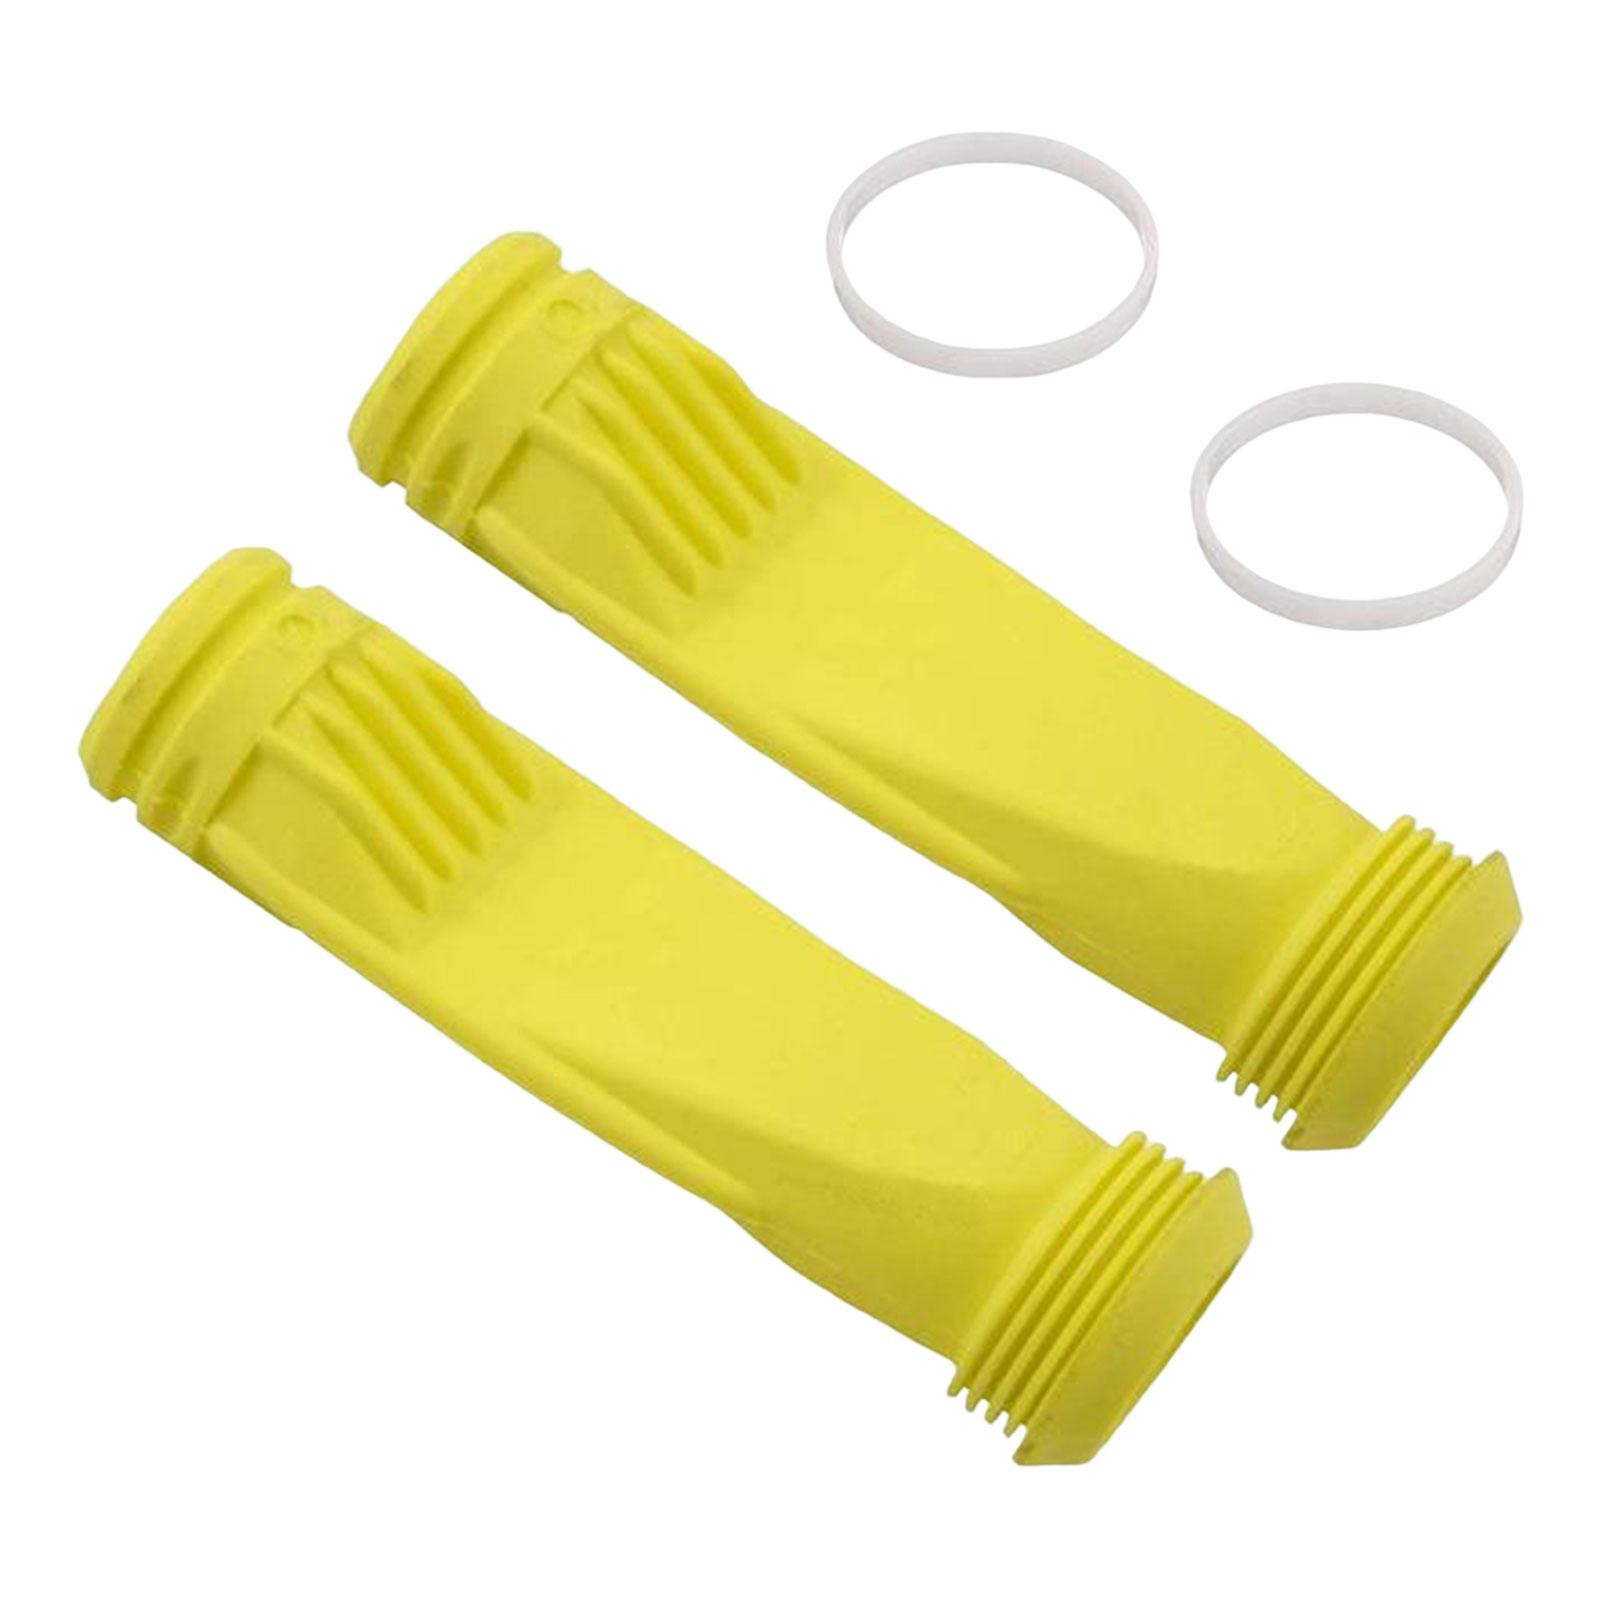 2x Pool Cleaner Diaphragm Easy to Mount Professional Portable Strong Replaces Long Service Life Heavy Duty with Retaining Ring